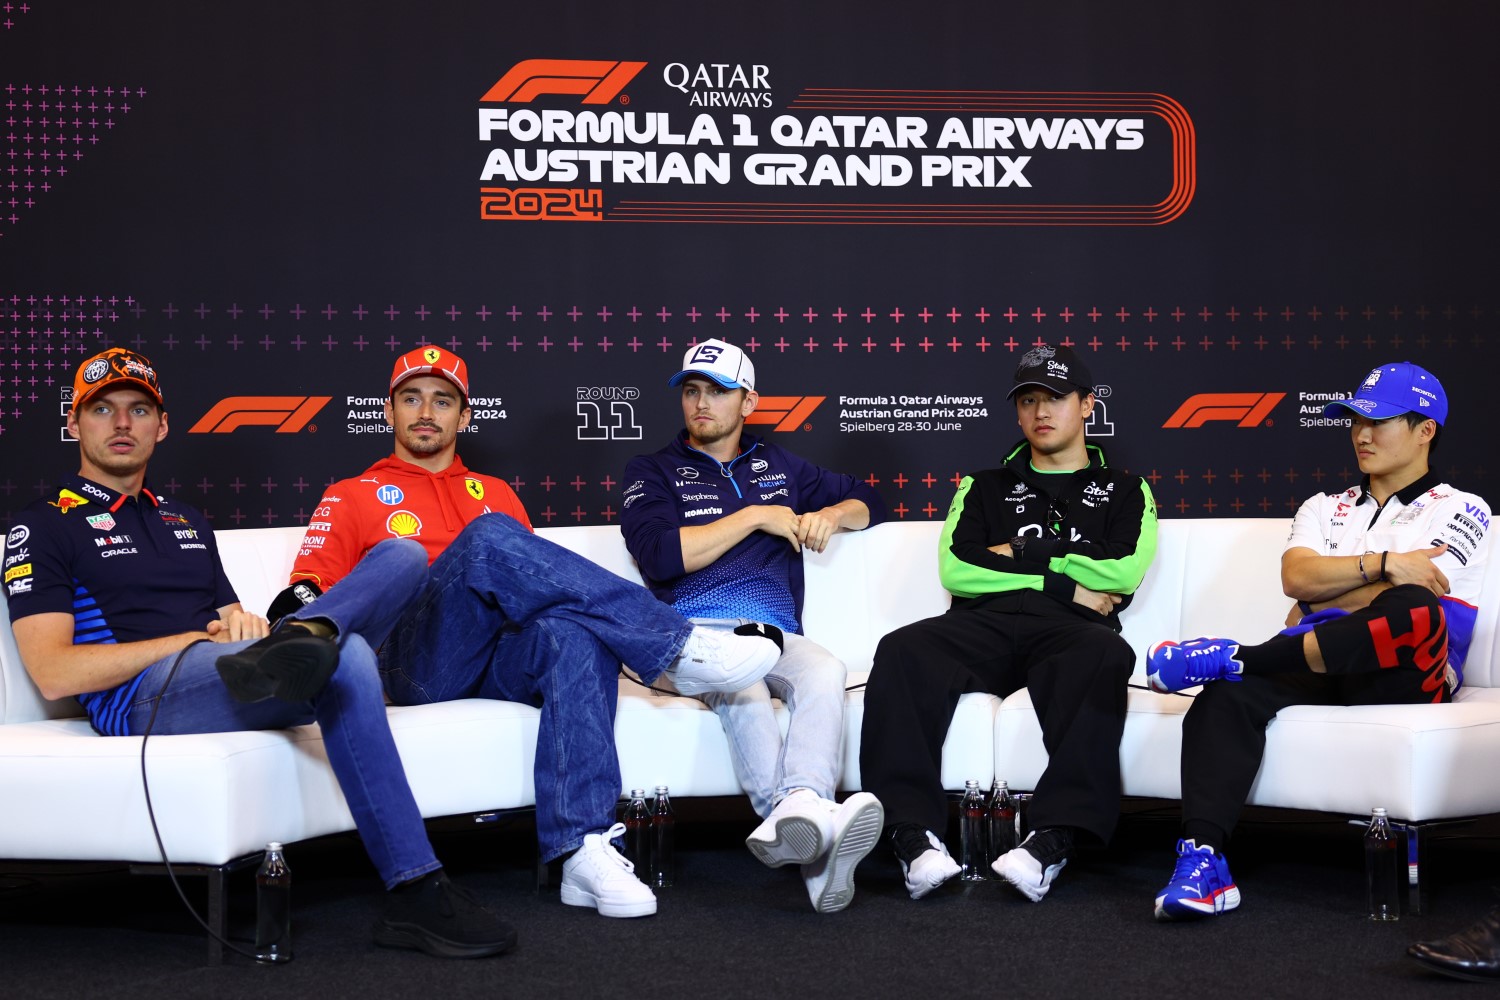 (L to R) Max Verstappen of the Netherlands and Oracle Red Bull Racing, Charles Leclerc of Monaco and Ferrari, Logan Sargeant of United States and Williams, Zhou Guanyu of China and Stake F1 Team Kick Sauber and Yuki Tsunoda of Japan and Visa Cash App RB attend the Drivers Press Conference during previews ahead of the F1 Grand Prix of Austria at Red Bull Ring on June 27, 2024 in Spielberg, Austria. (Photo by Clive Rose/Getty Images) // Getty Images / Red Bull Content Pool